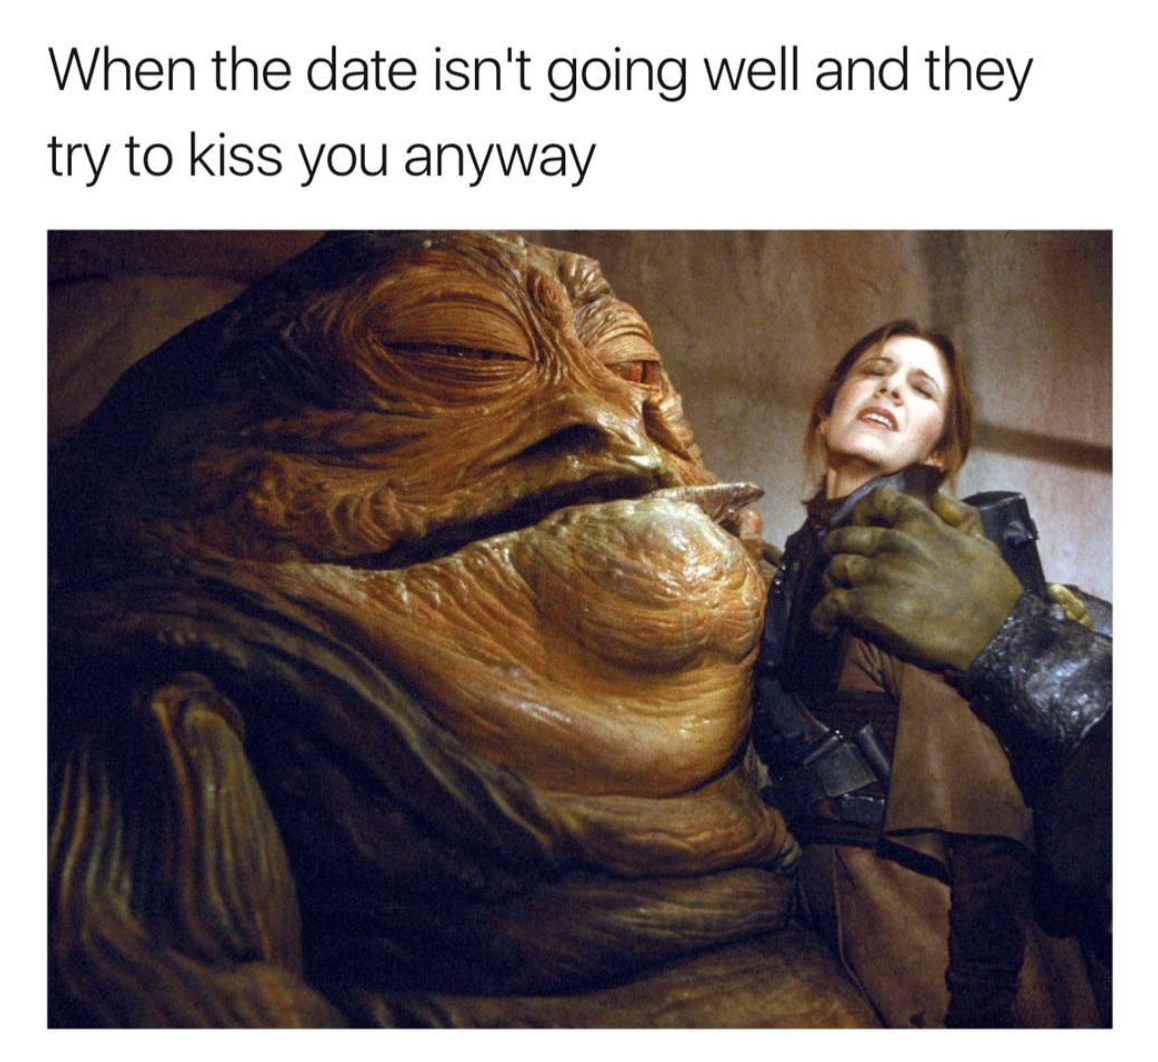 not want - When the date isn't going well and they try to kiss you anyway